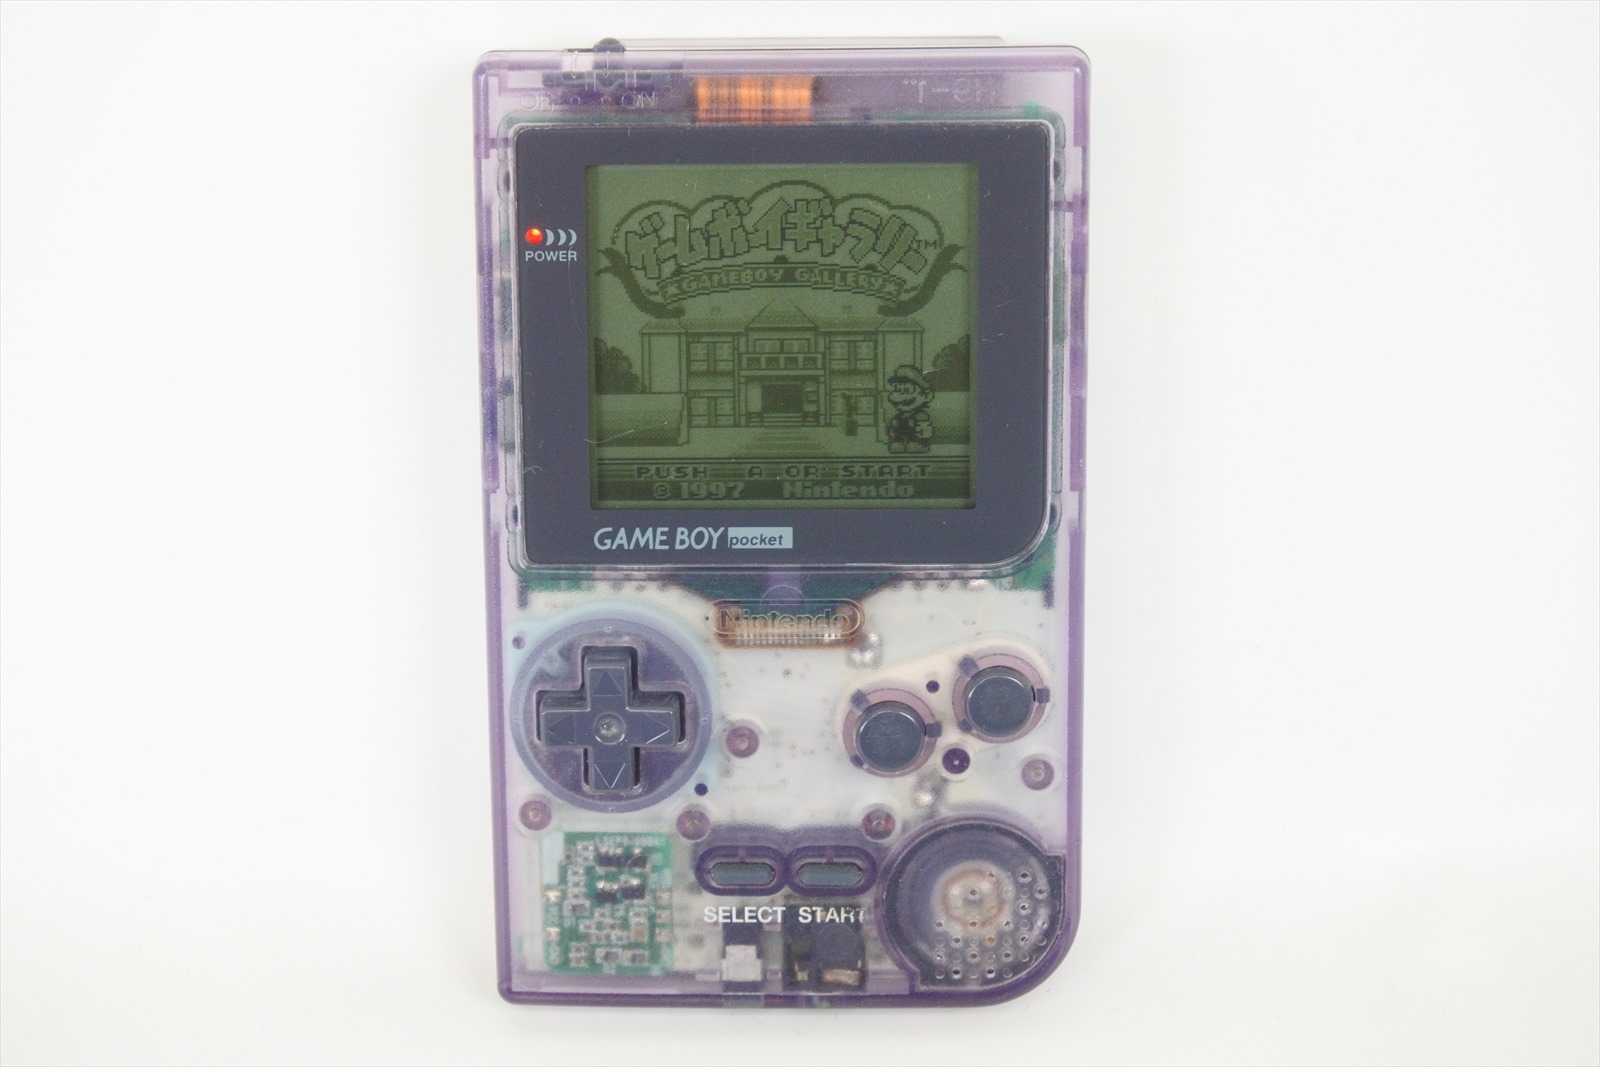 Mine game boy. Obsessed with the Pocket Console.